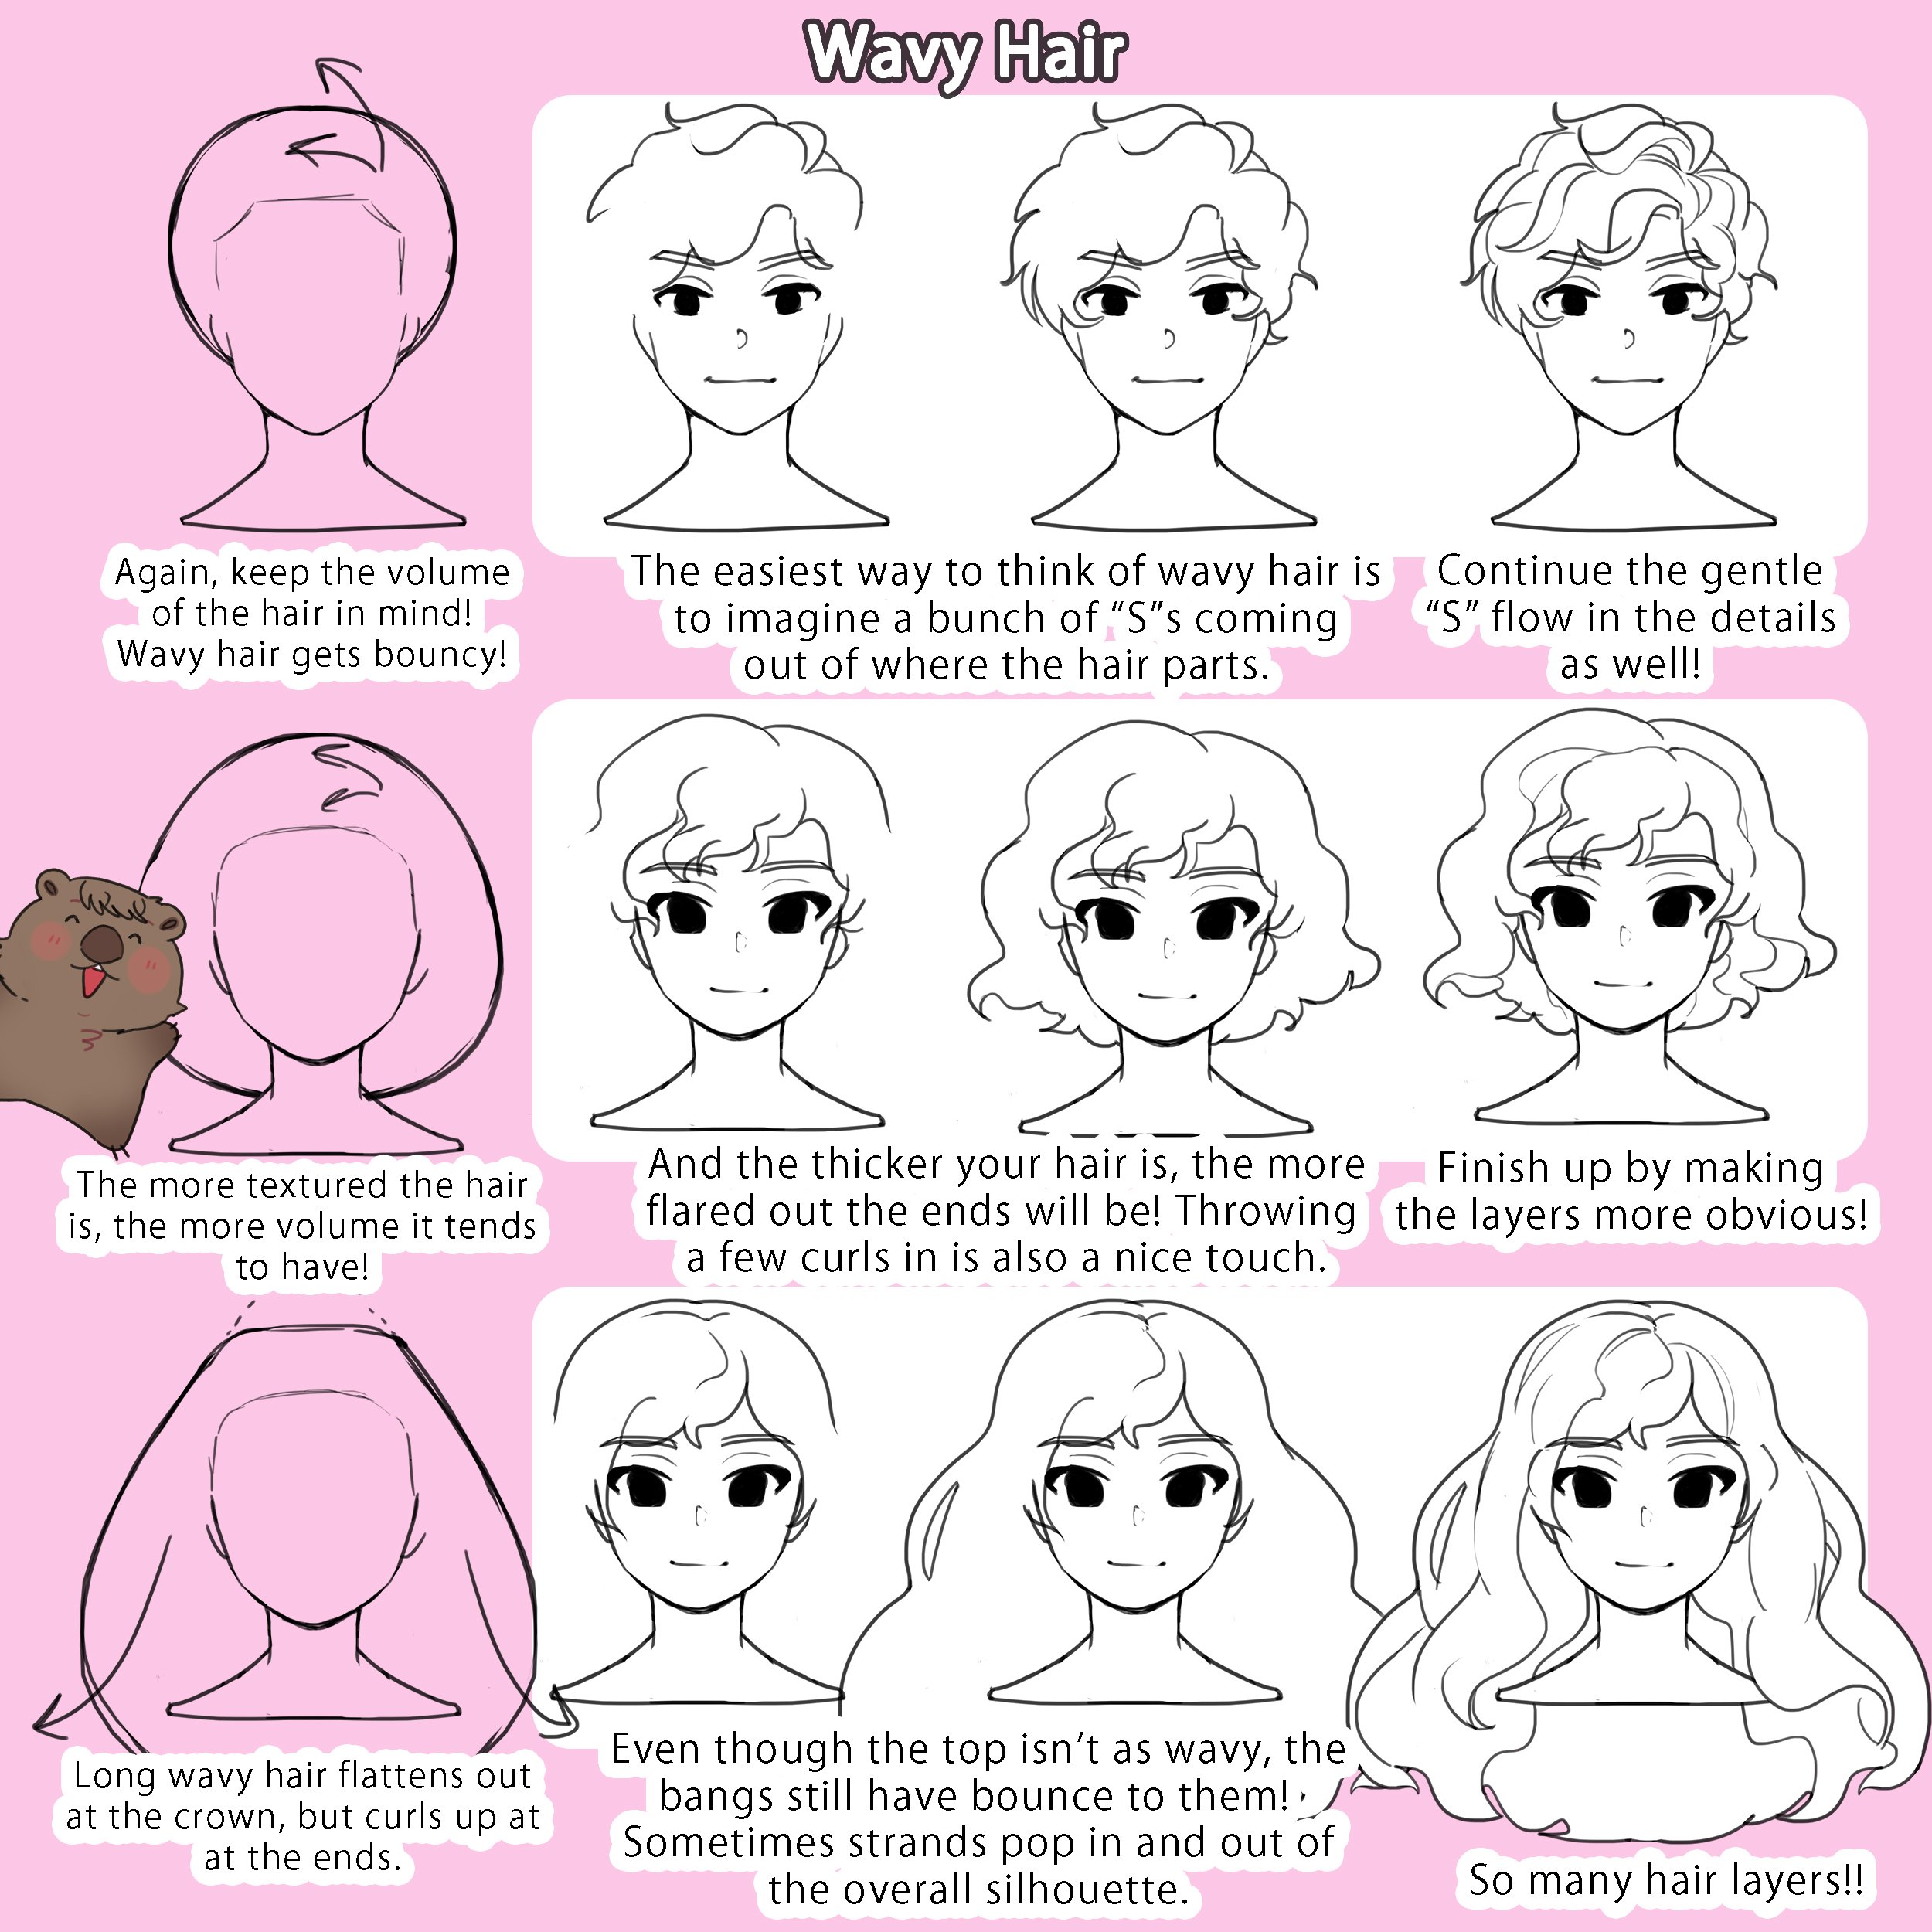 Magic Poser on X: 🌸 How To Draw Hands: Anime Style! 🌸 Learn how